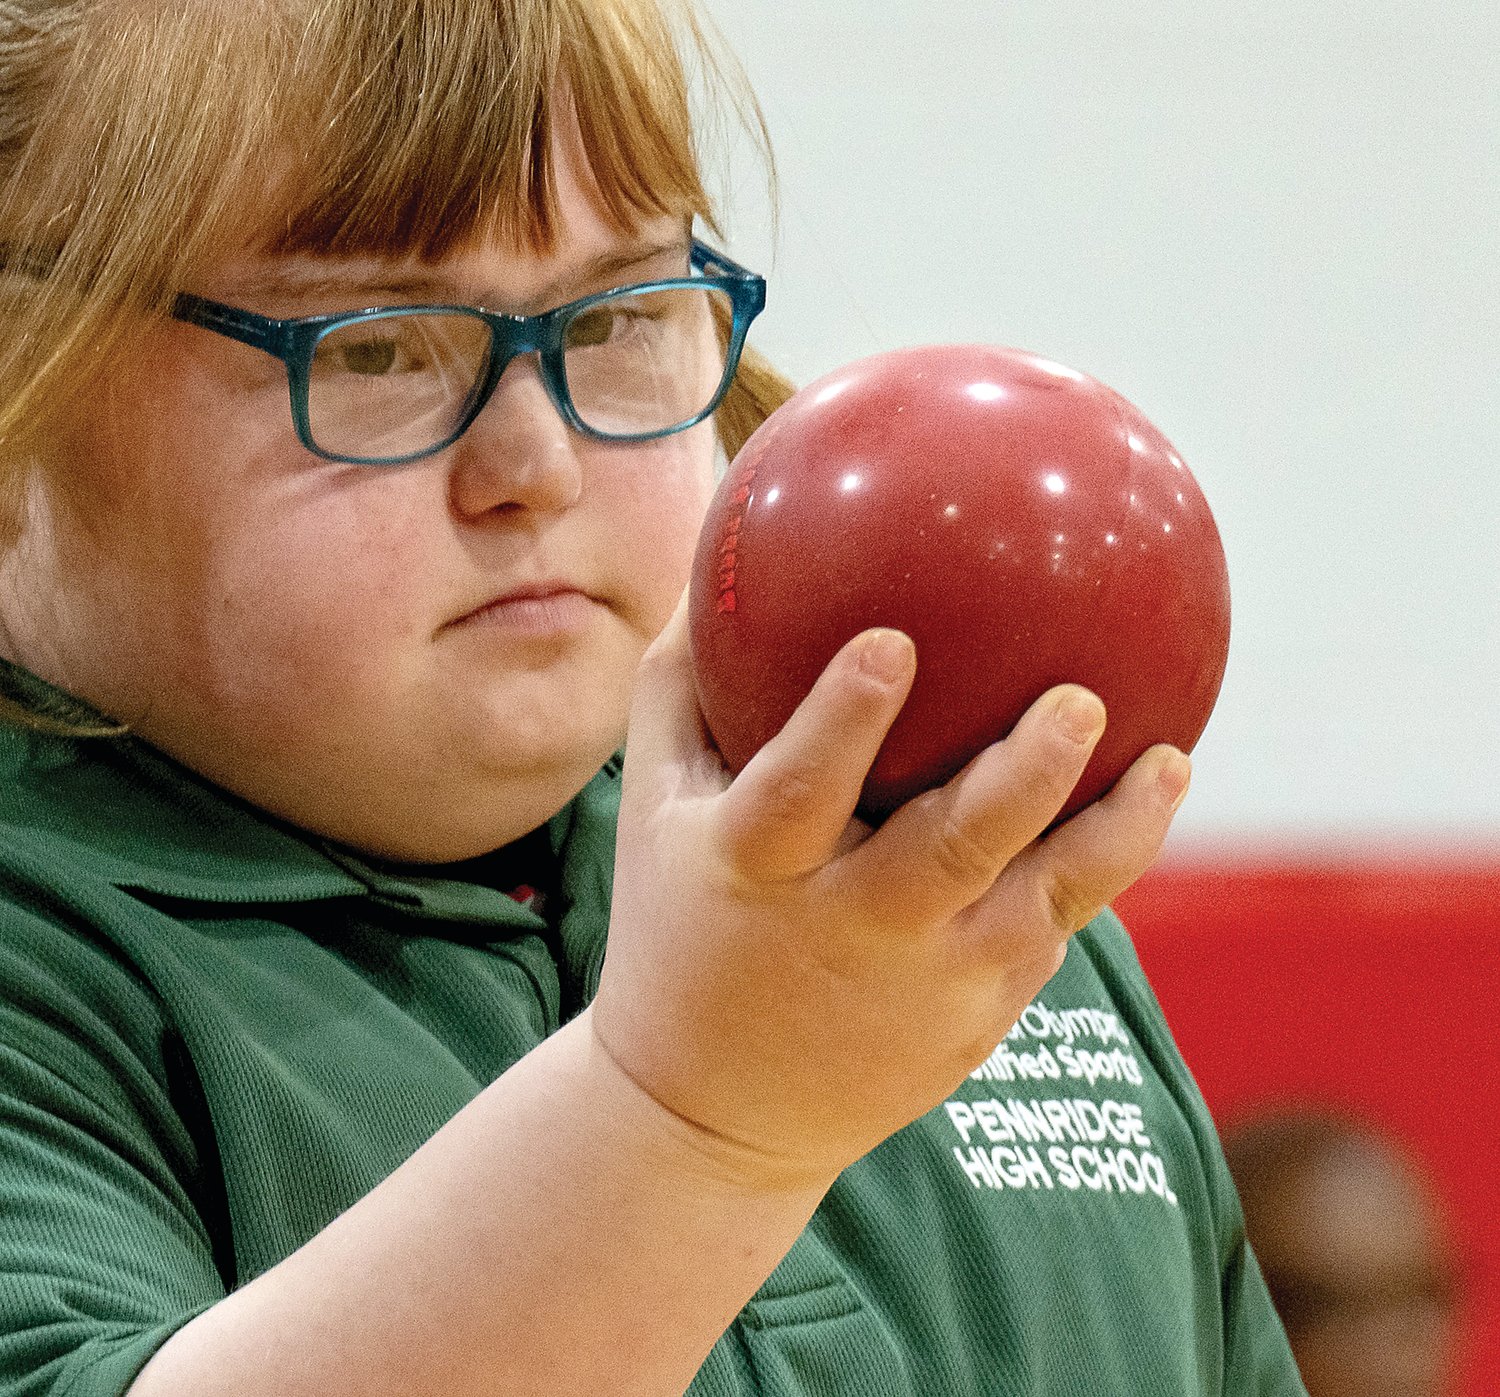 Rylee Wunsch, of Pennridge High School, holds her bocce ball as she sizes up the distance from her end of the bocce ball court to the other end at Bristol High School March 3.